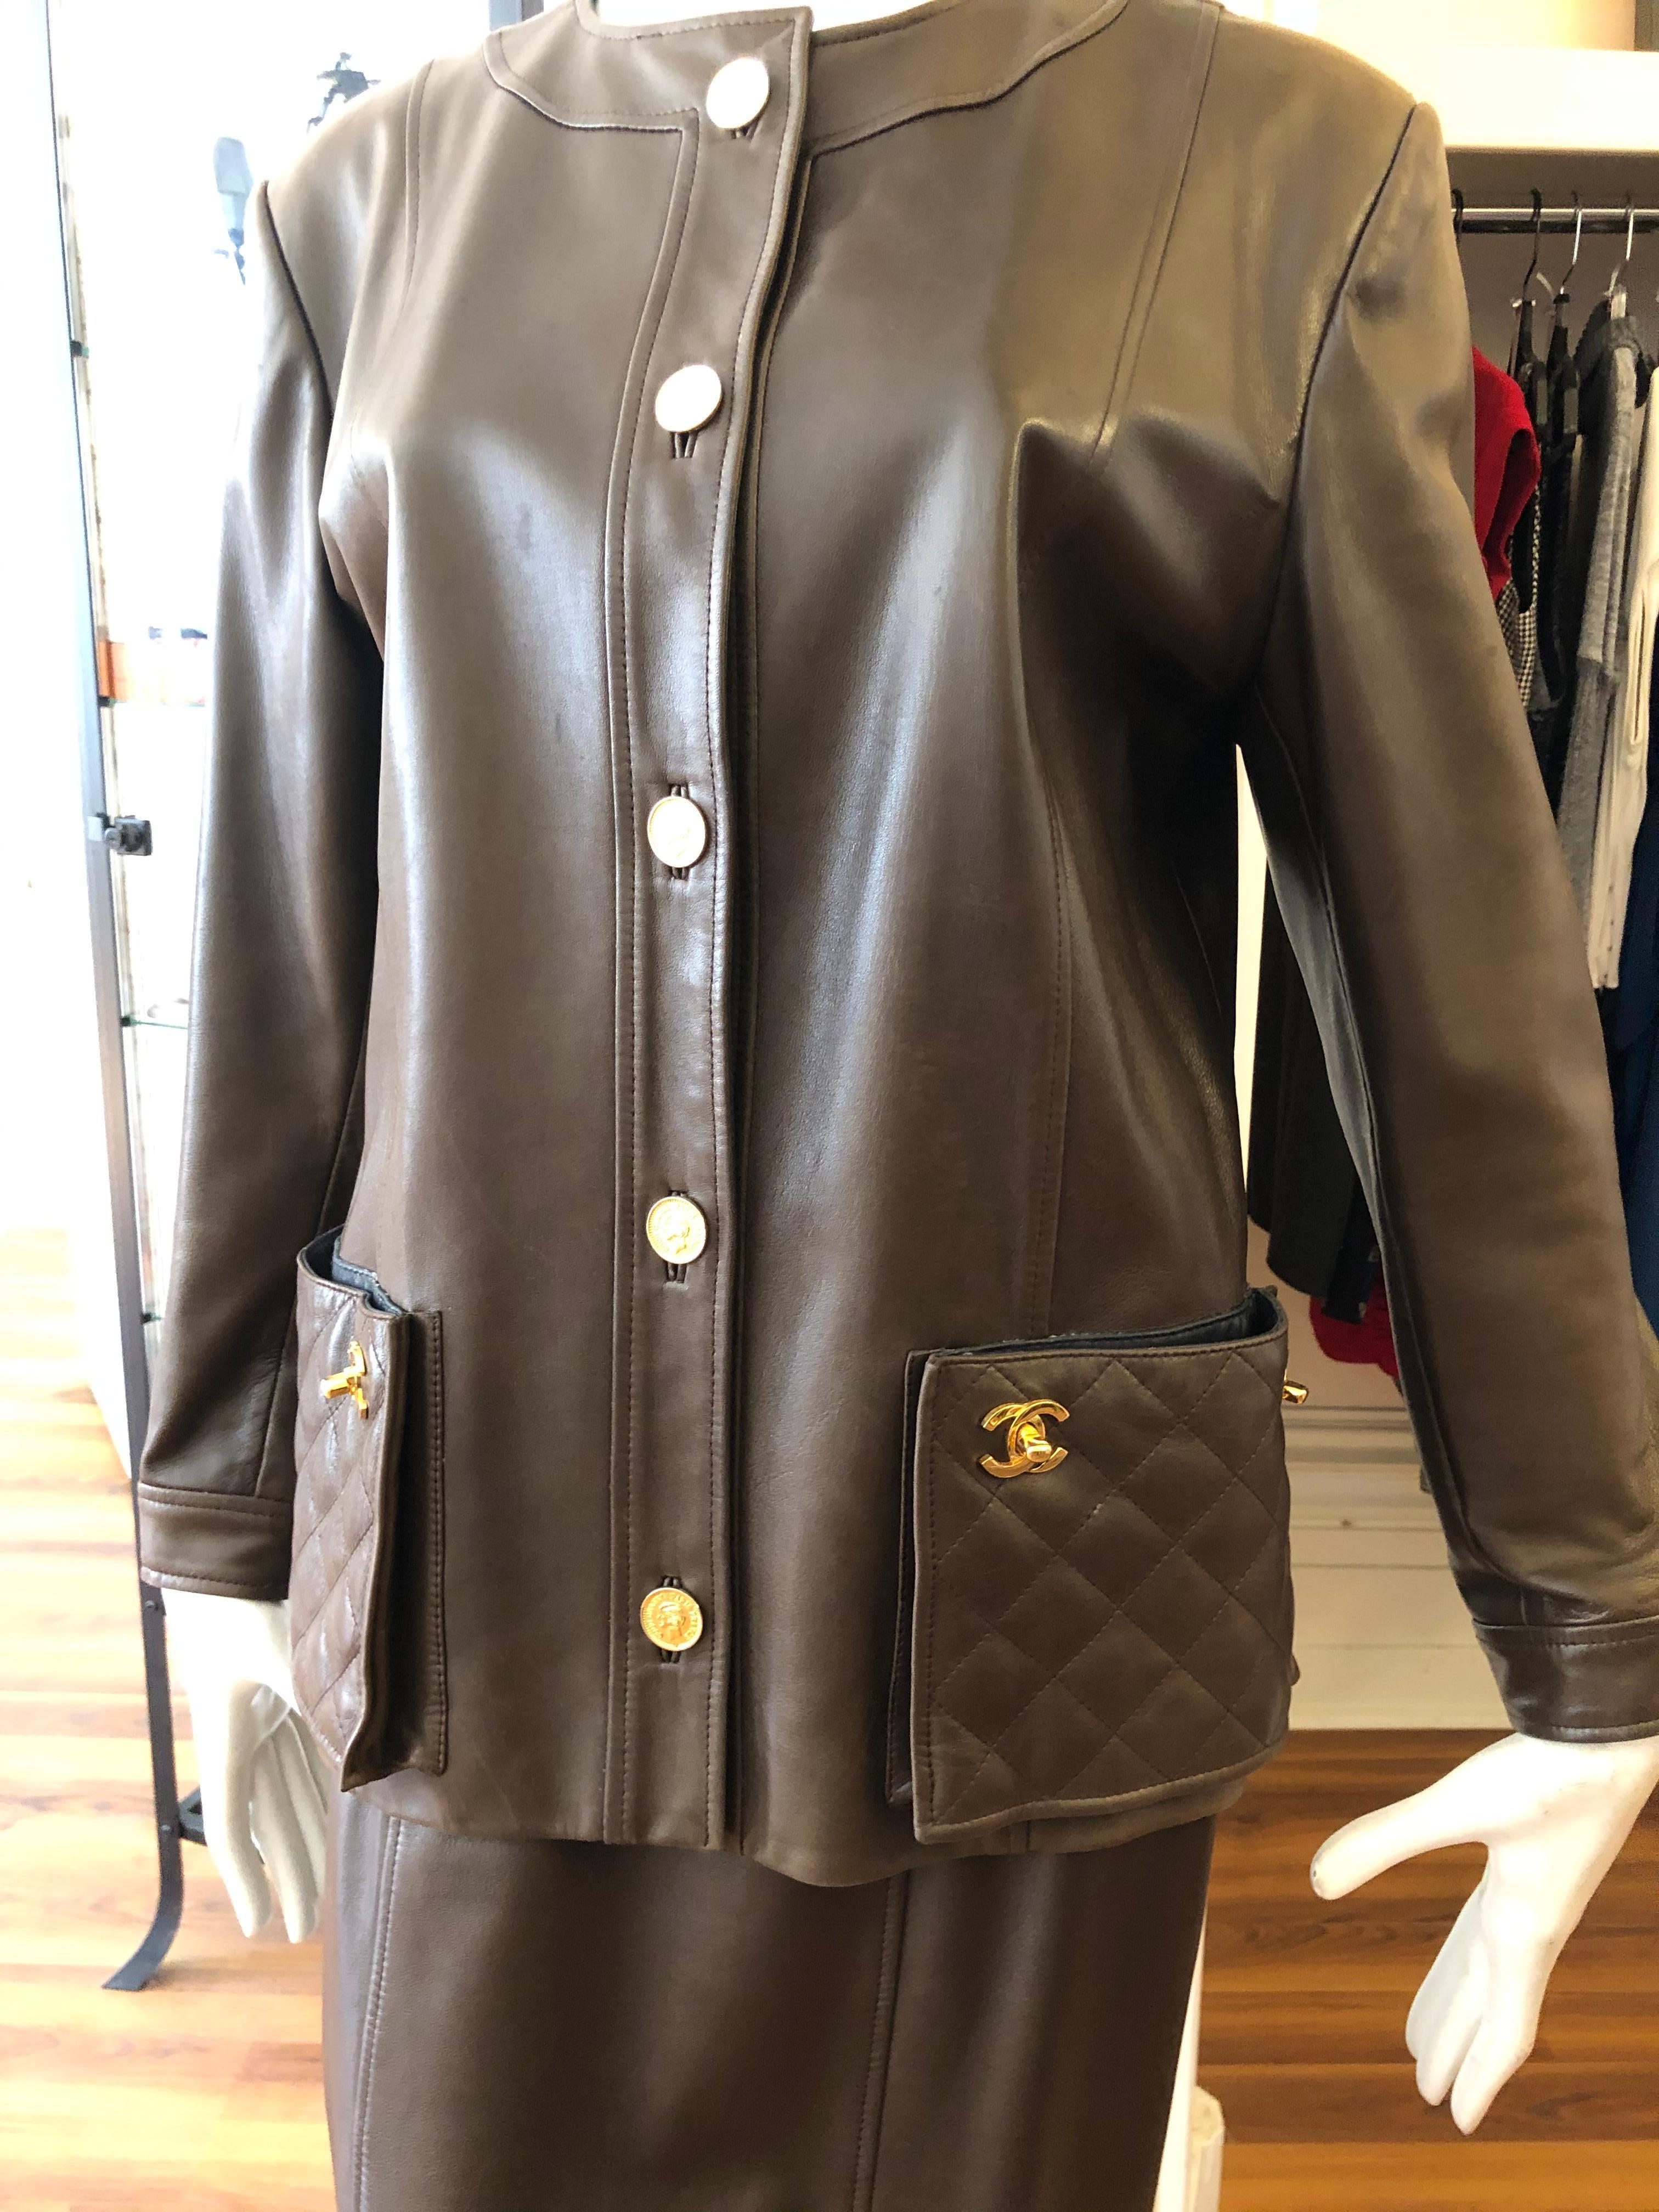 Crafted of superior lambskin this suit is buttery soft with a lovely silk lining, The fit is relaxed and the piece timeless. It can be worn as a suit or separately. There are two quilted patch pockets to the front with the CC turn lock fastening. As